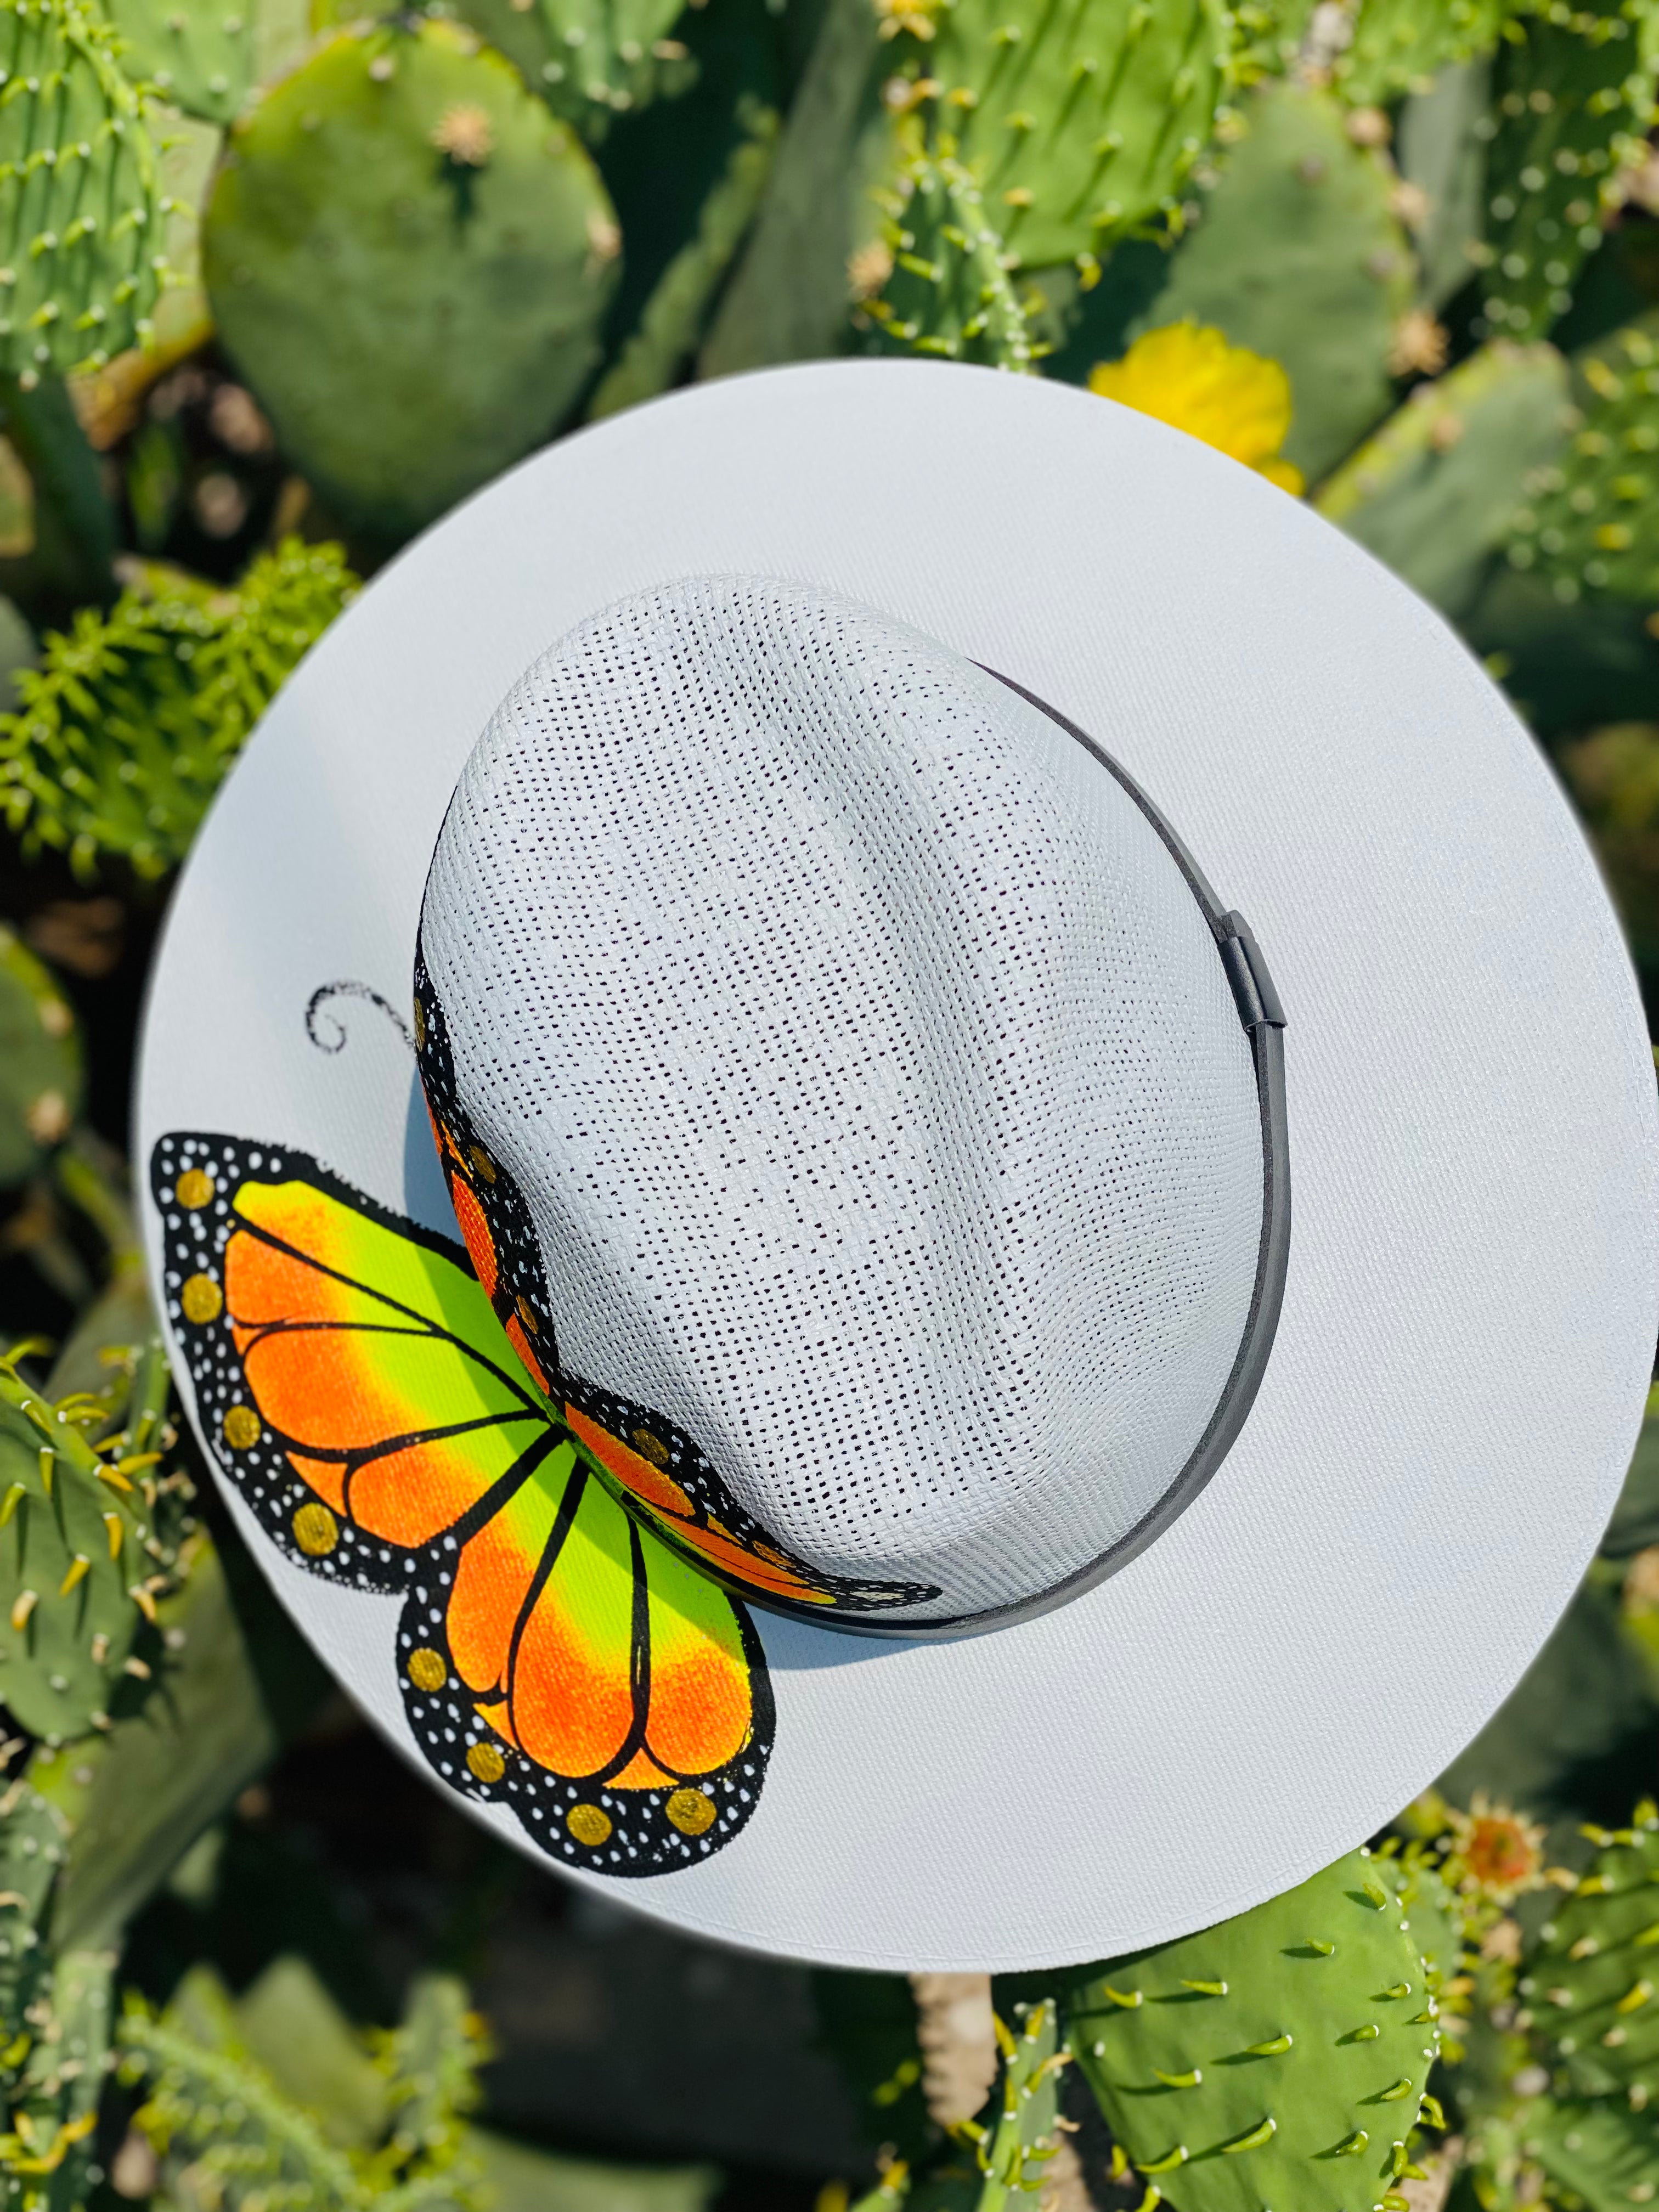 Orange & Yellow Butterfly Hand Painted Hat